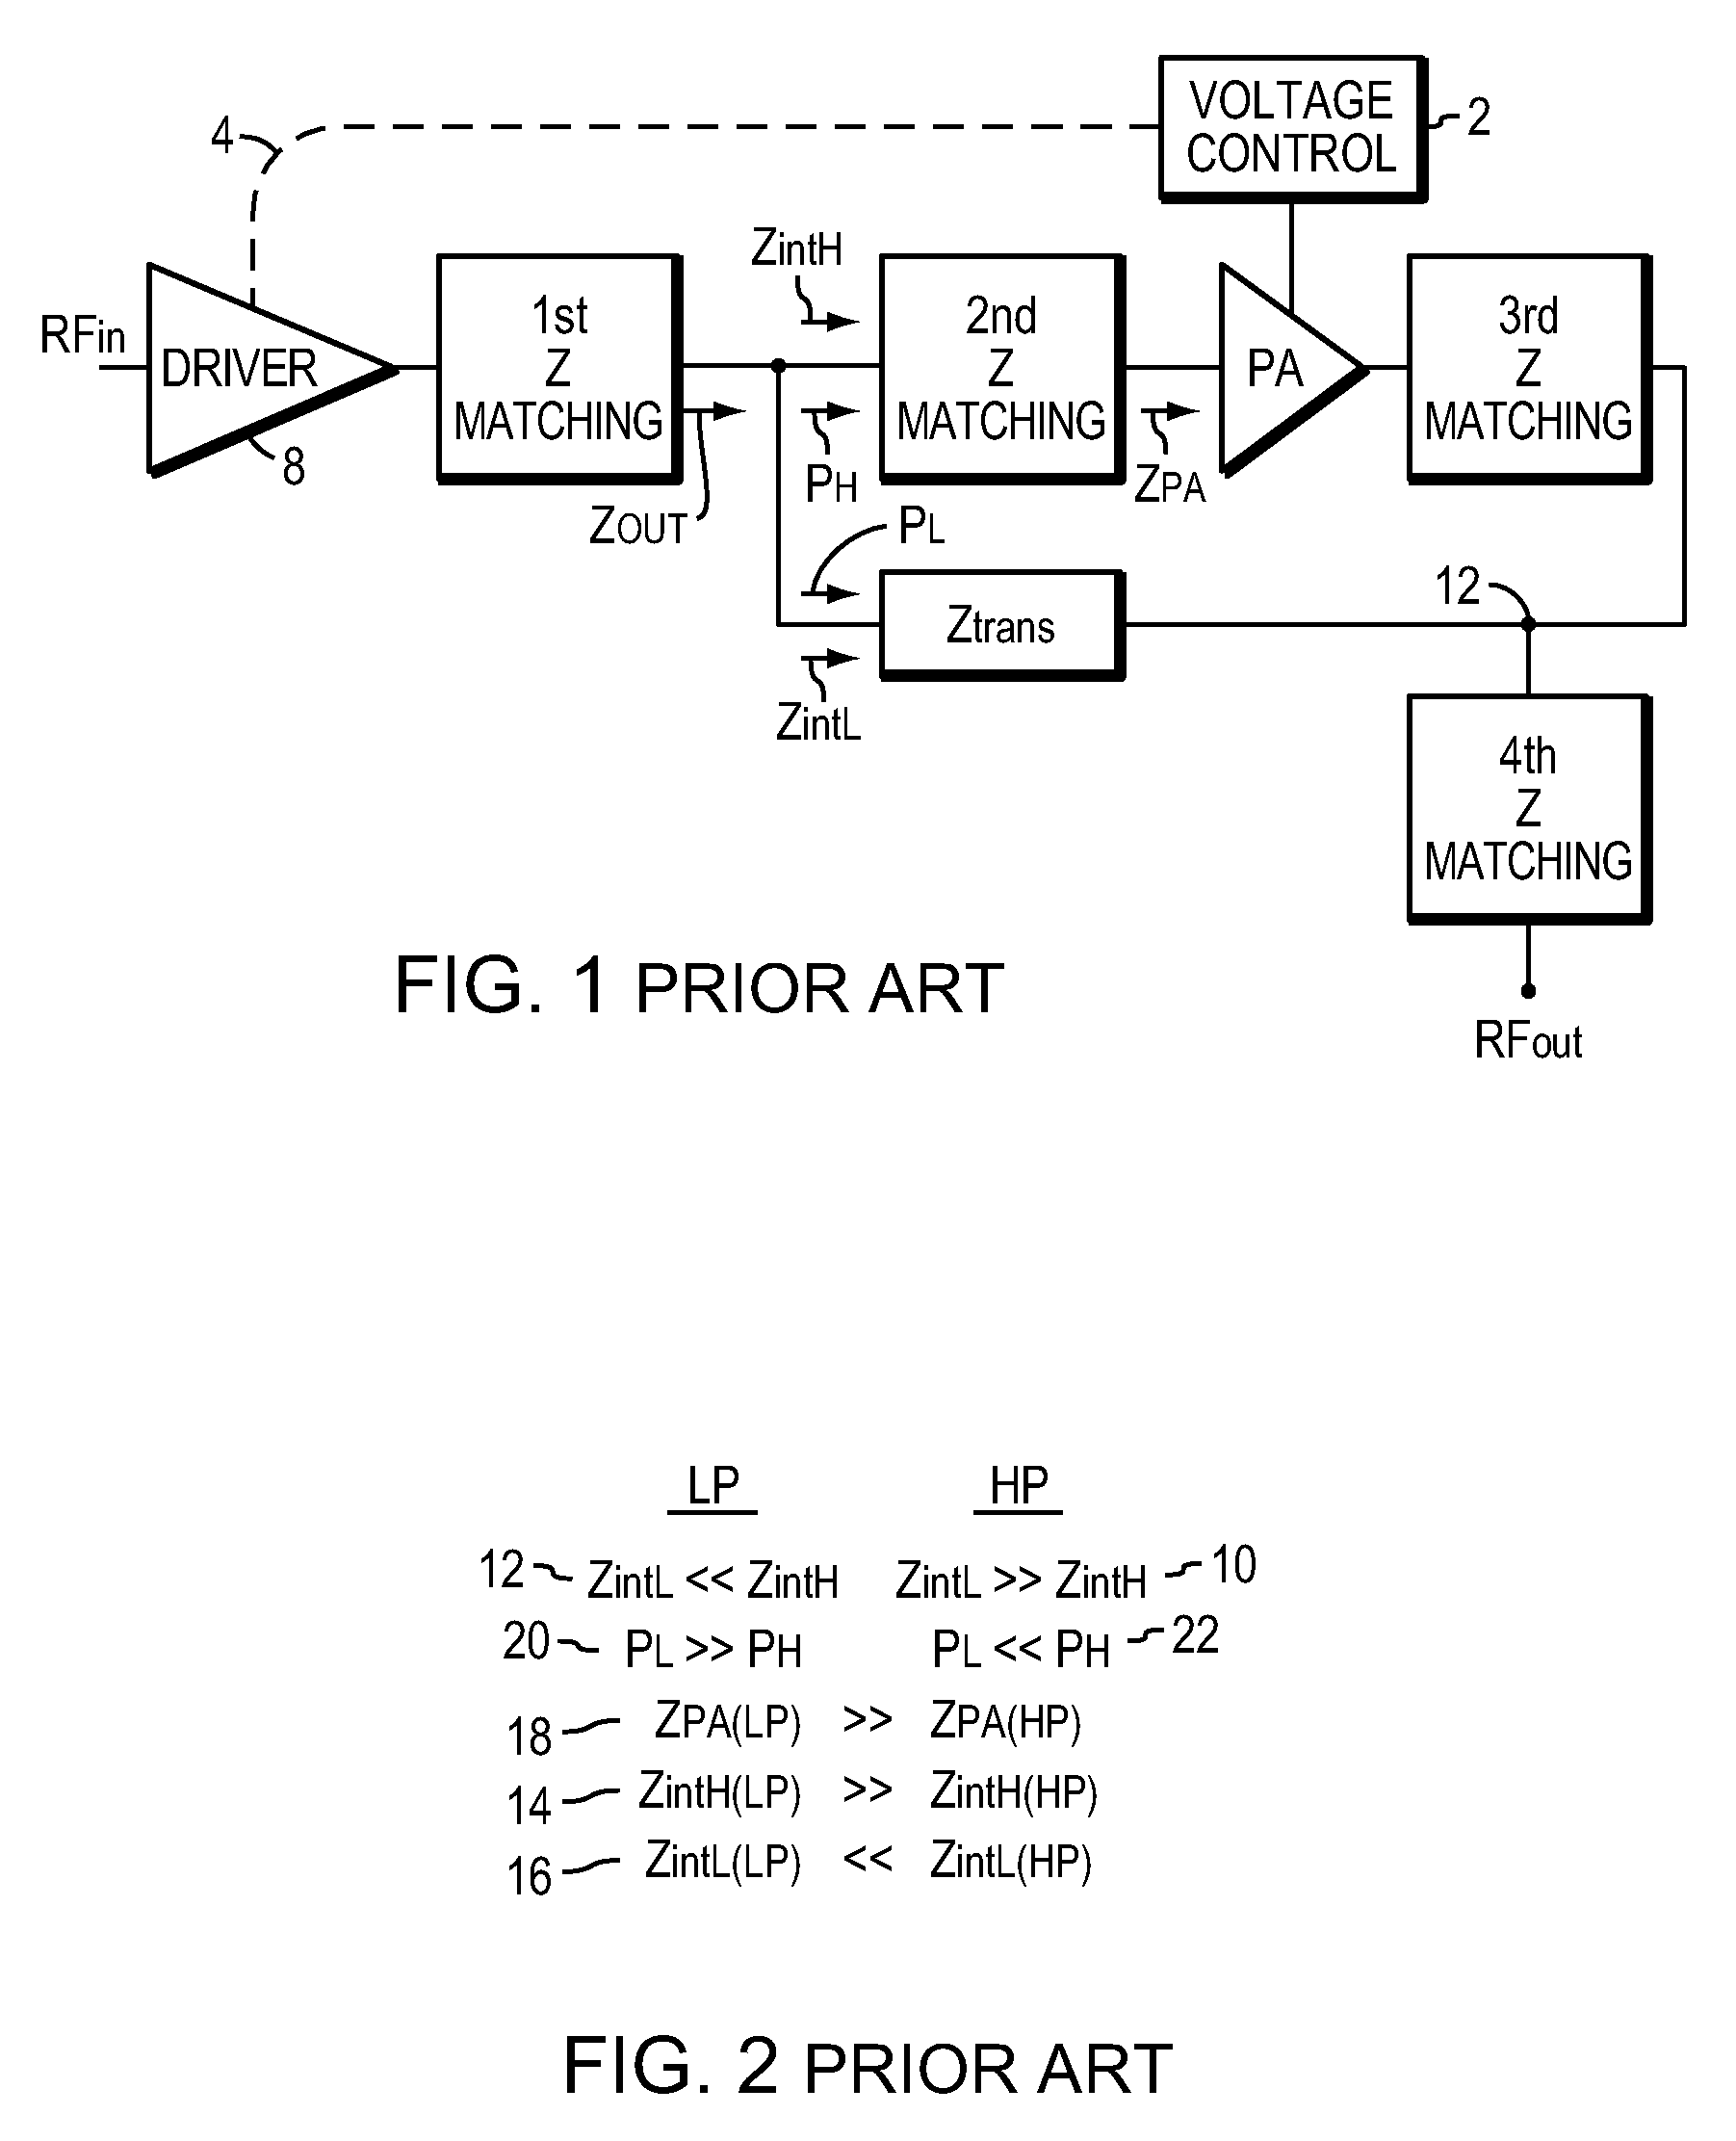 Multi-mode power amplifier with high efficiency under backoff operation